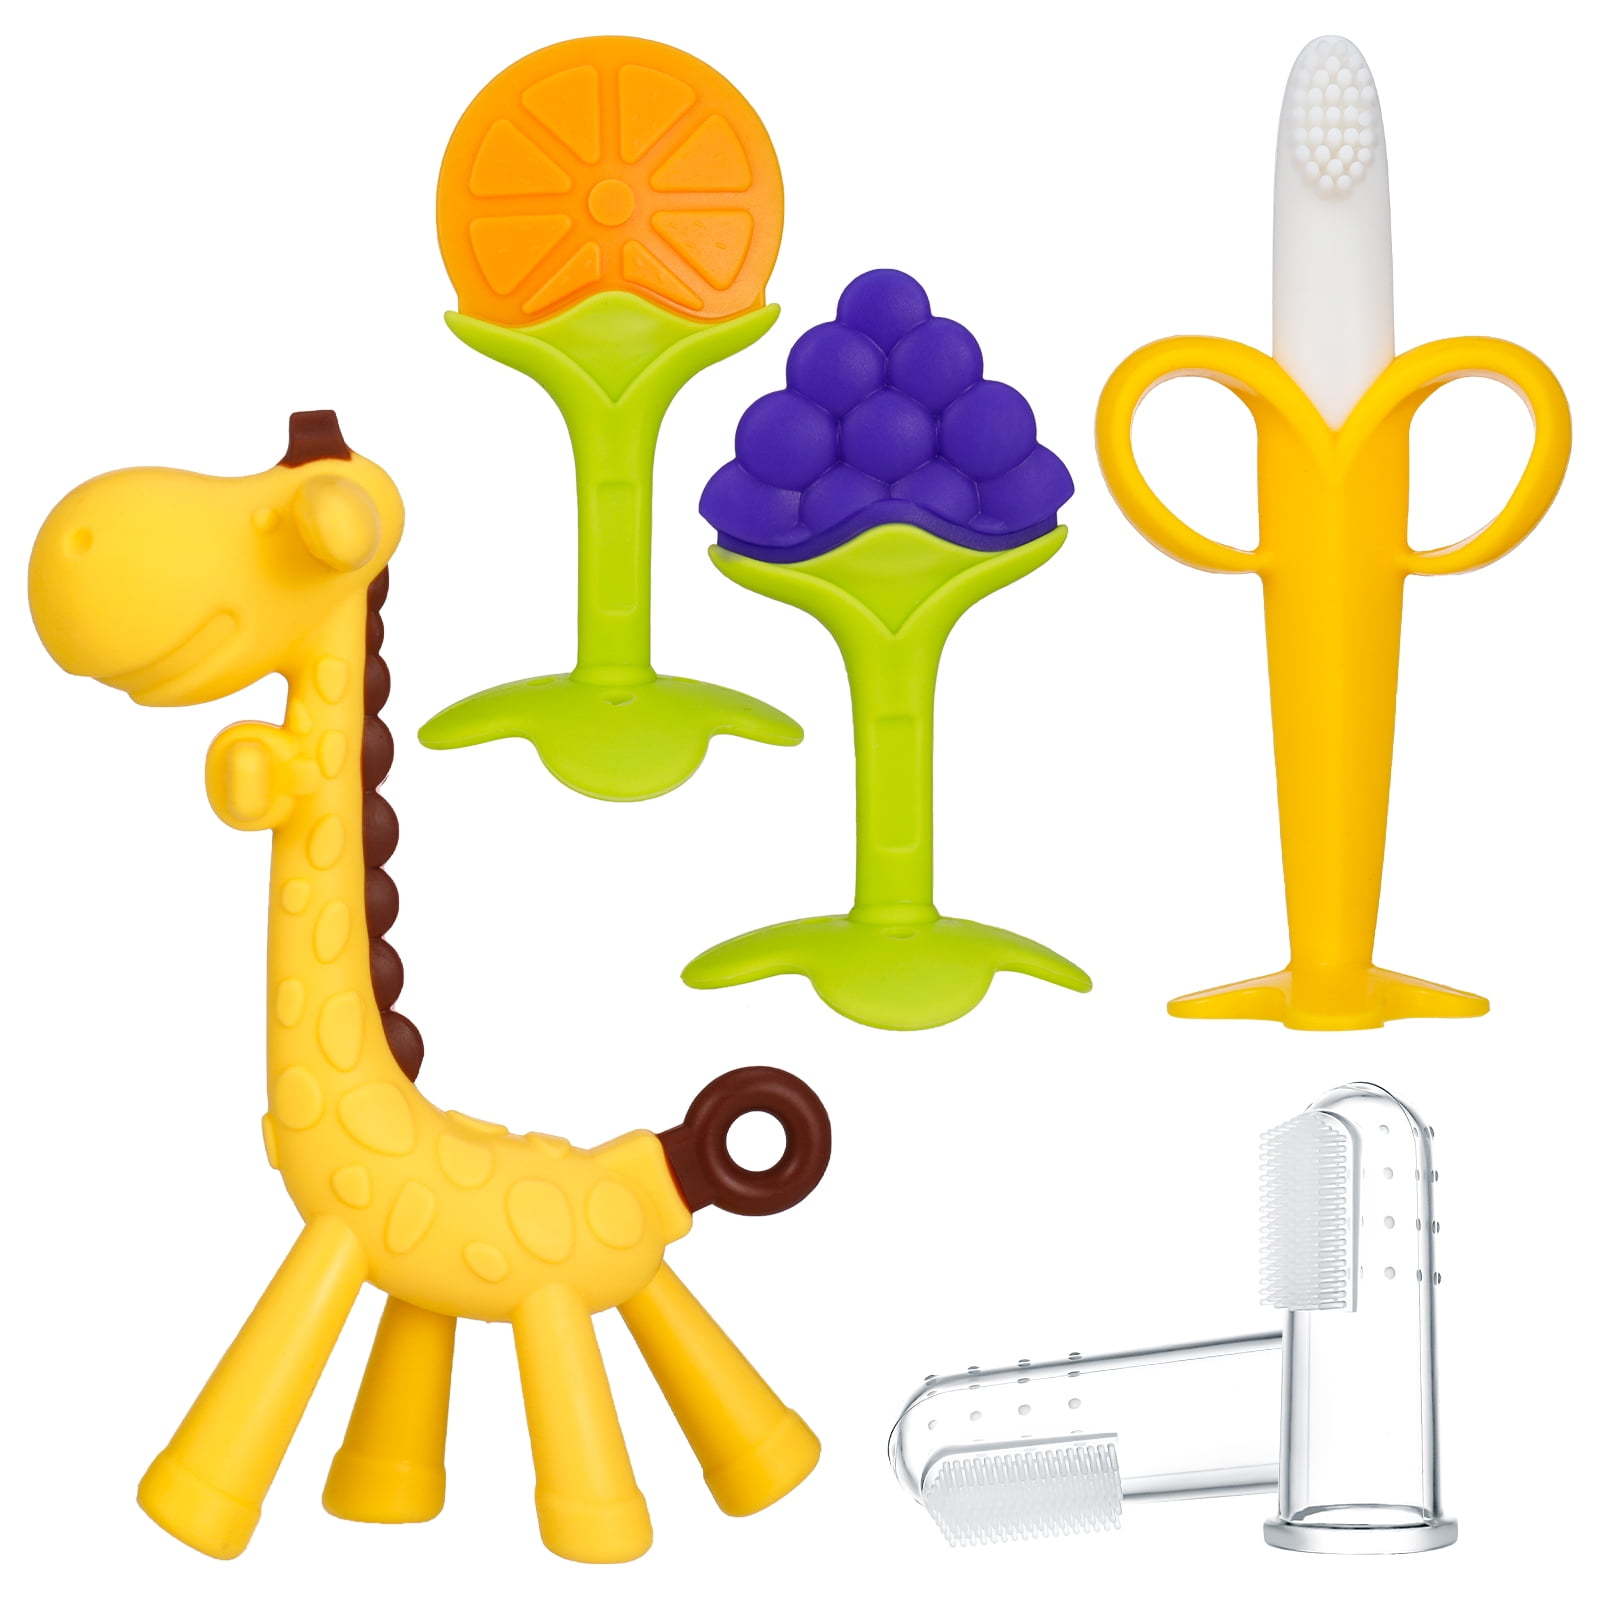 Taihexin 6 Pack Baby Teething Toys, BPA Free Silicone Baby Teether, Soothe Babies Teething Relief Sore Gums, Banana Finger Toothbrush, Fruit Shape Giraffe Teether Set for Infant Boys and Girls(Yellow)